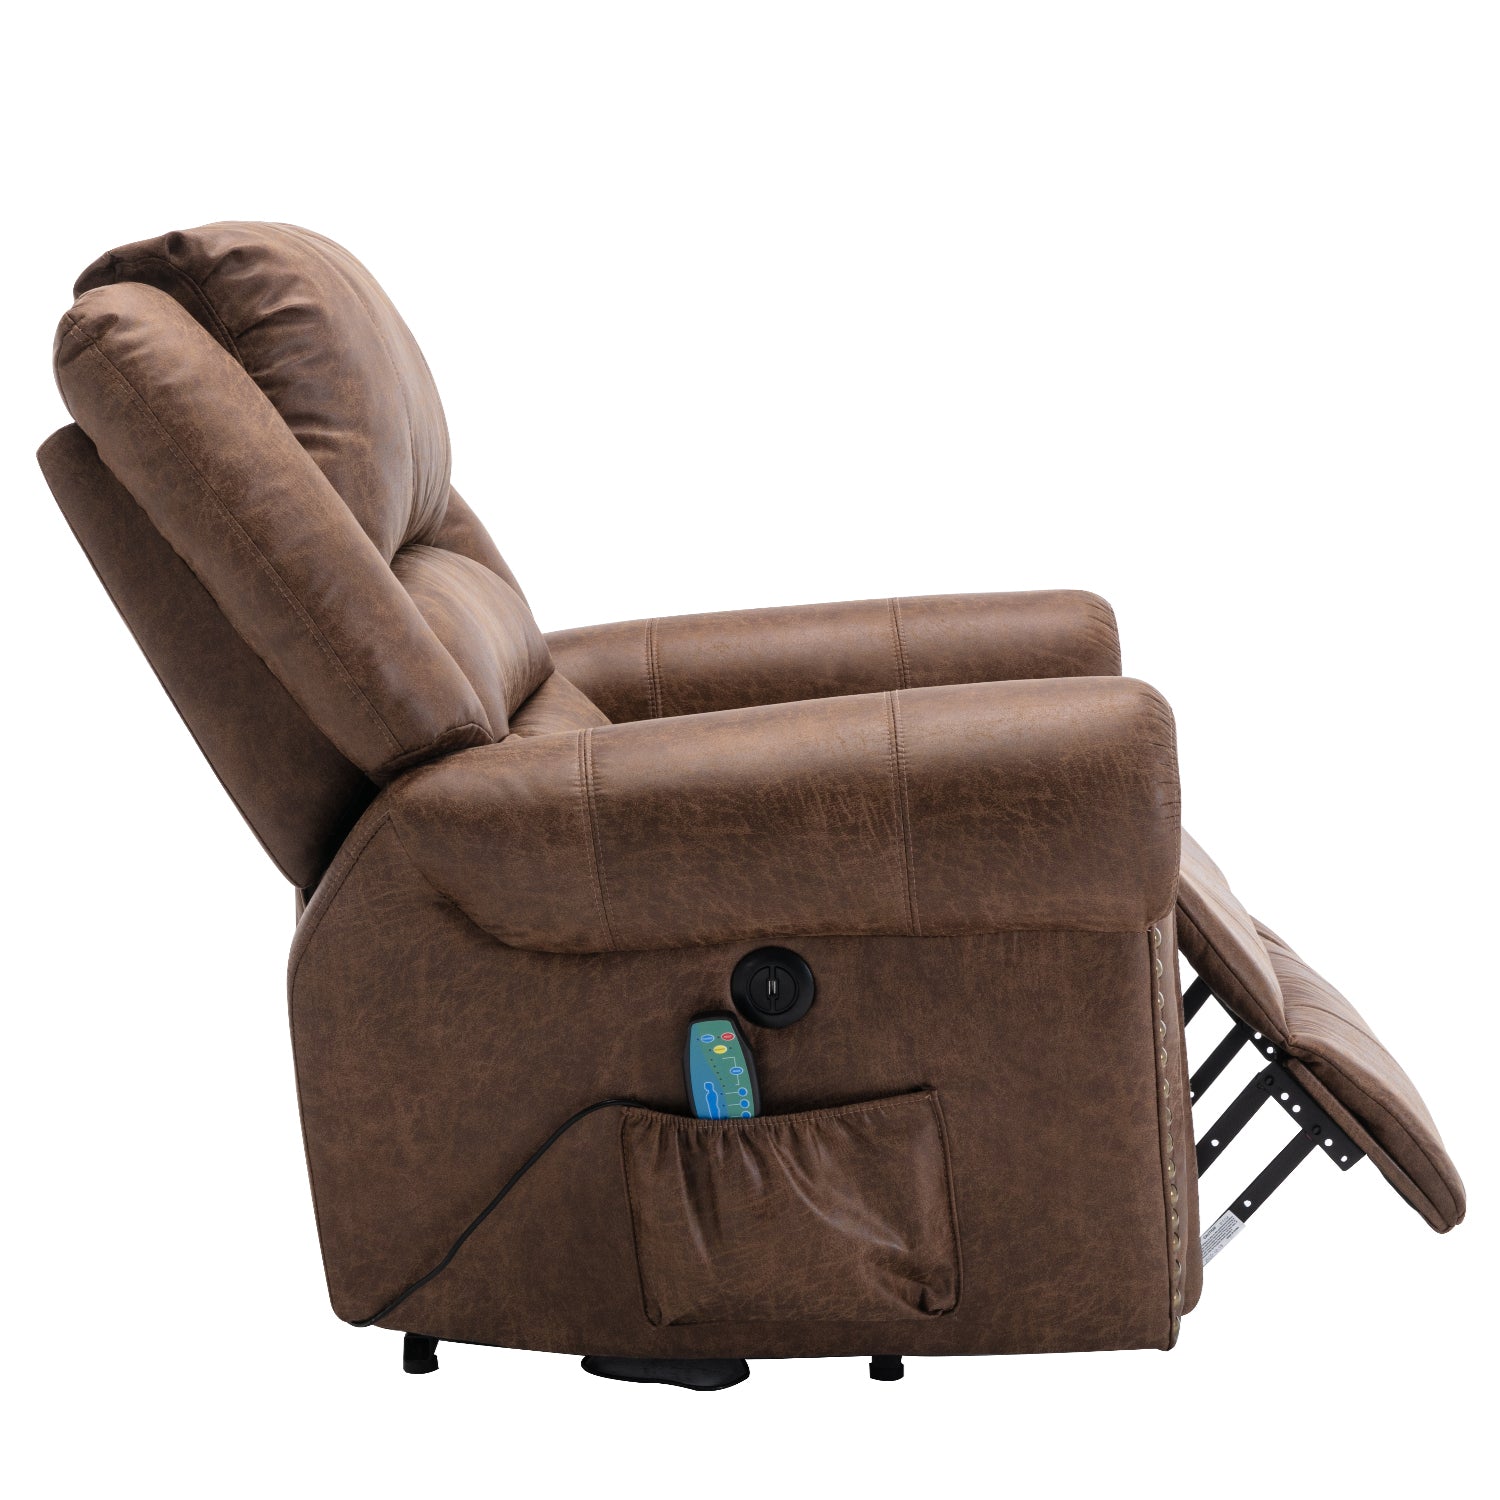 Nut Brown Power Lift Recliner Chair with Massage and Heat, side view, slightly reclined